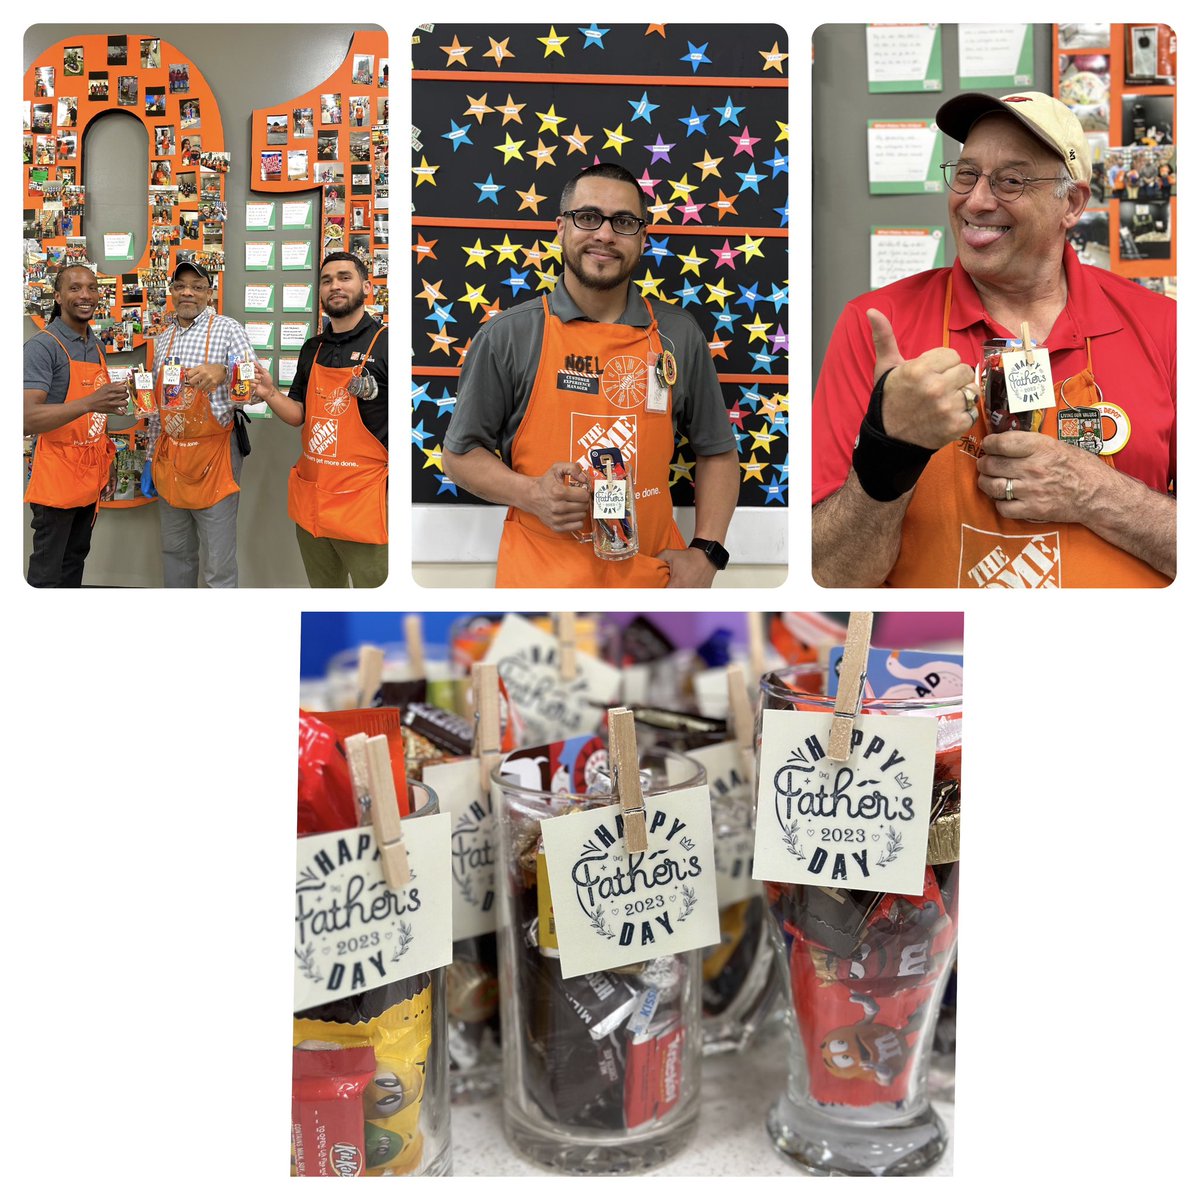 Kicking off the weekend with Father’s Day Gifts😎🙌🏼 We hope everyone has an amazing Father’s Day weekend and a special shout out to all the dad’s at 1912! Thanks for all the dad jokes gentlemen!🧡 @THDPimentel @williejimenez99 @D65Hutch @MikeRousek